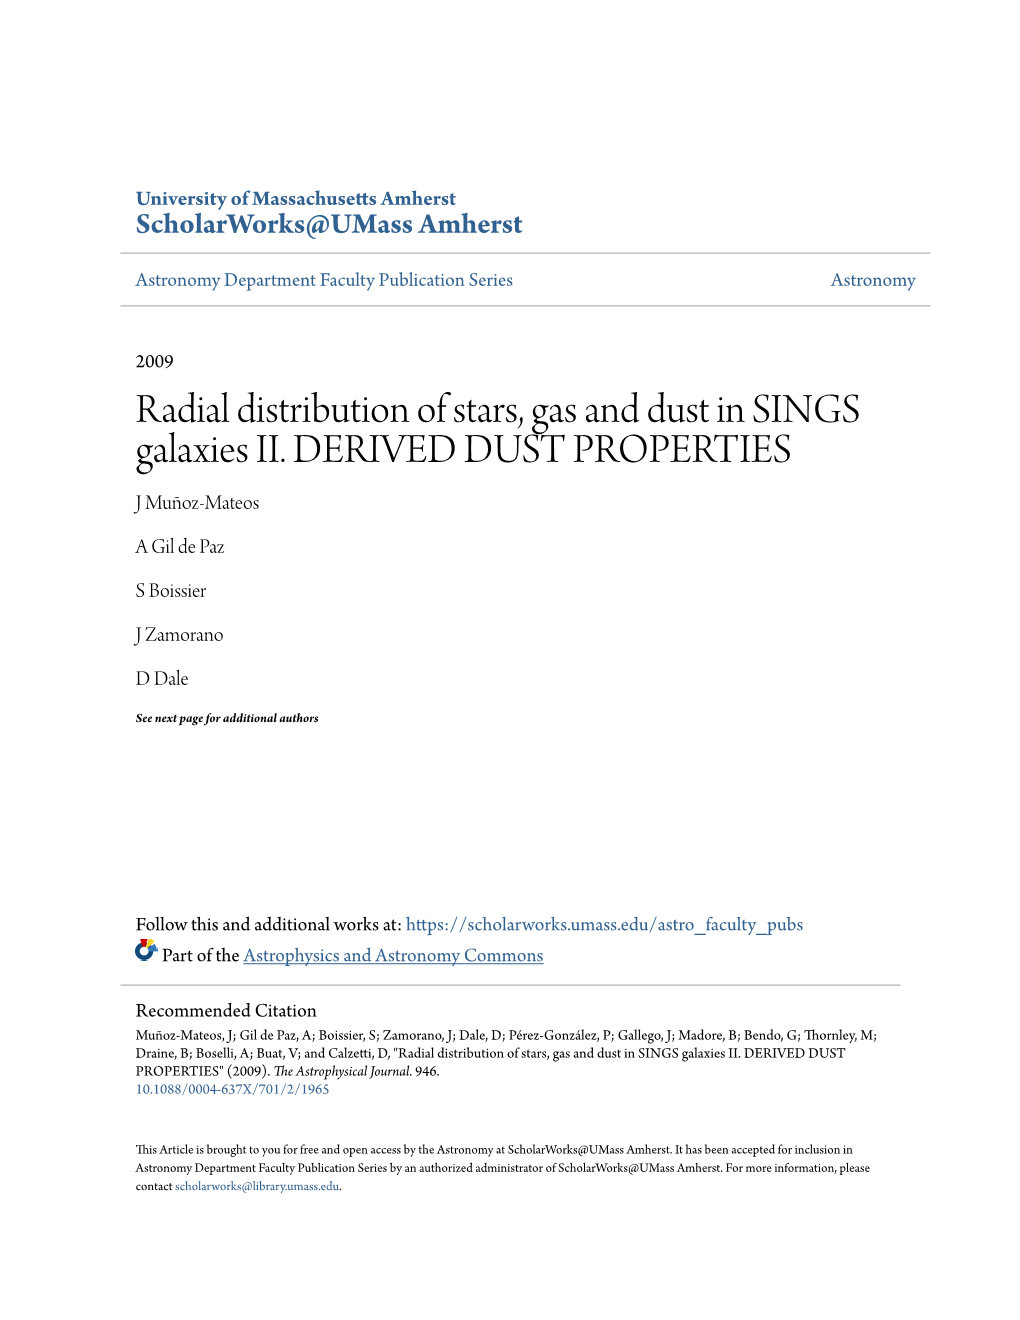 Radial Distribution of Stars, Gas and Dust in SINGS Galaxies II. DERIVED DUST PROPERTIES J Muñoz-Mateos